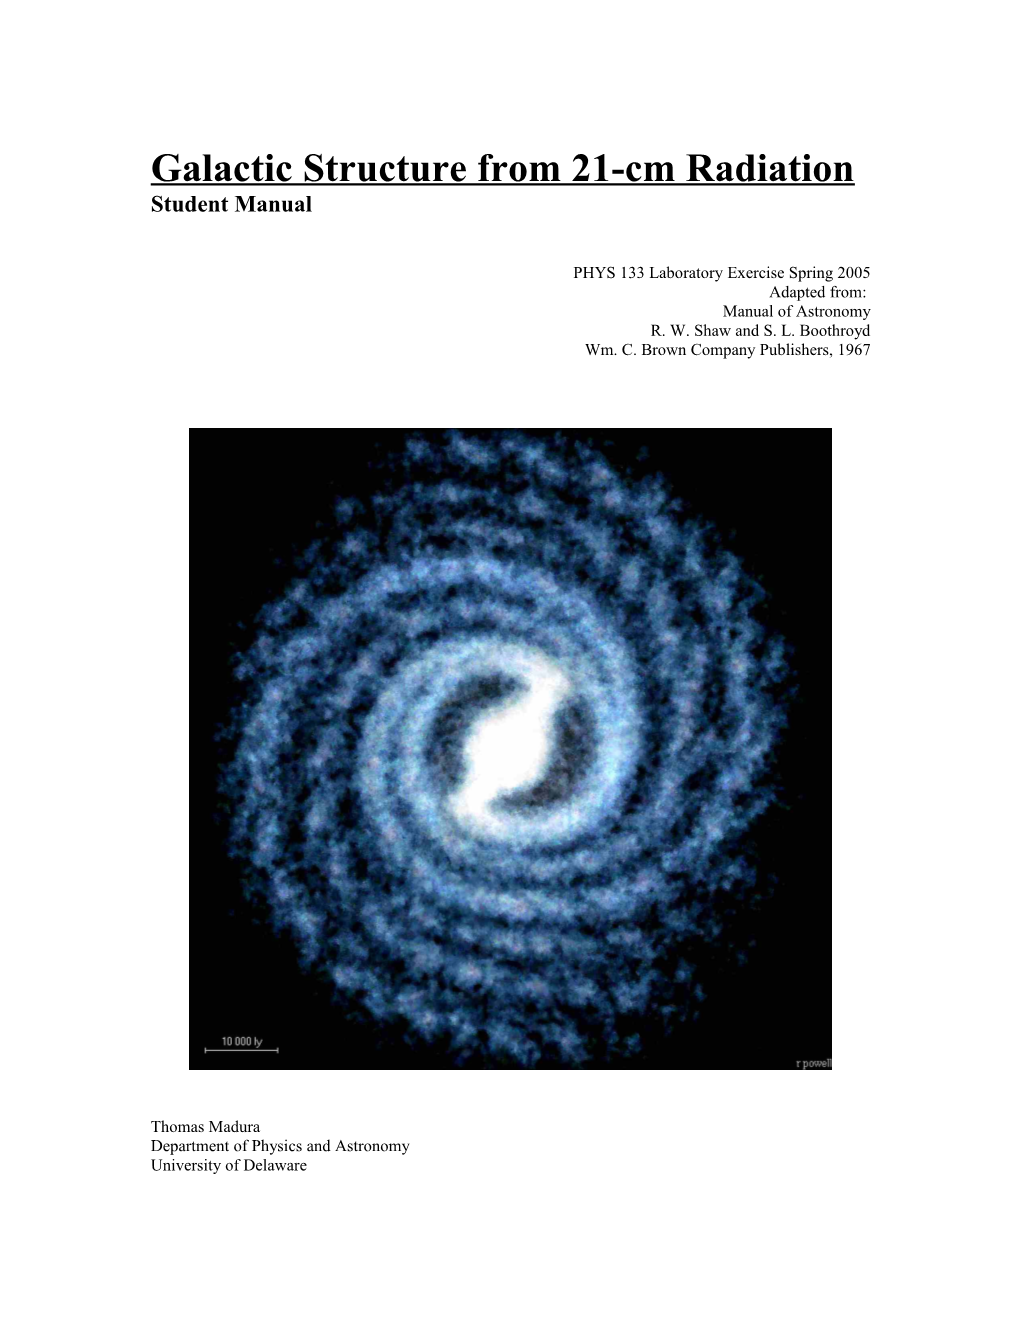 Galactic Structure from 21-Cm Radiation